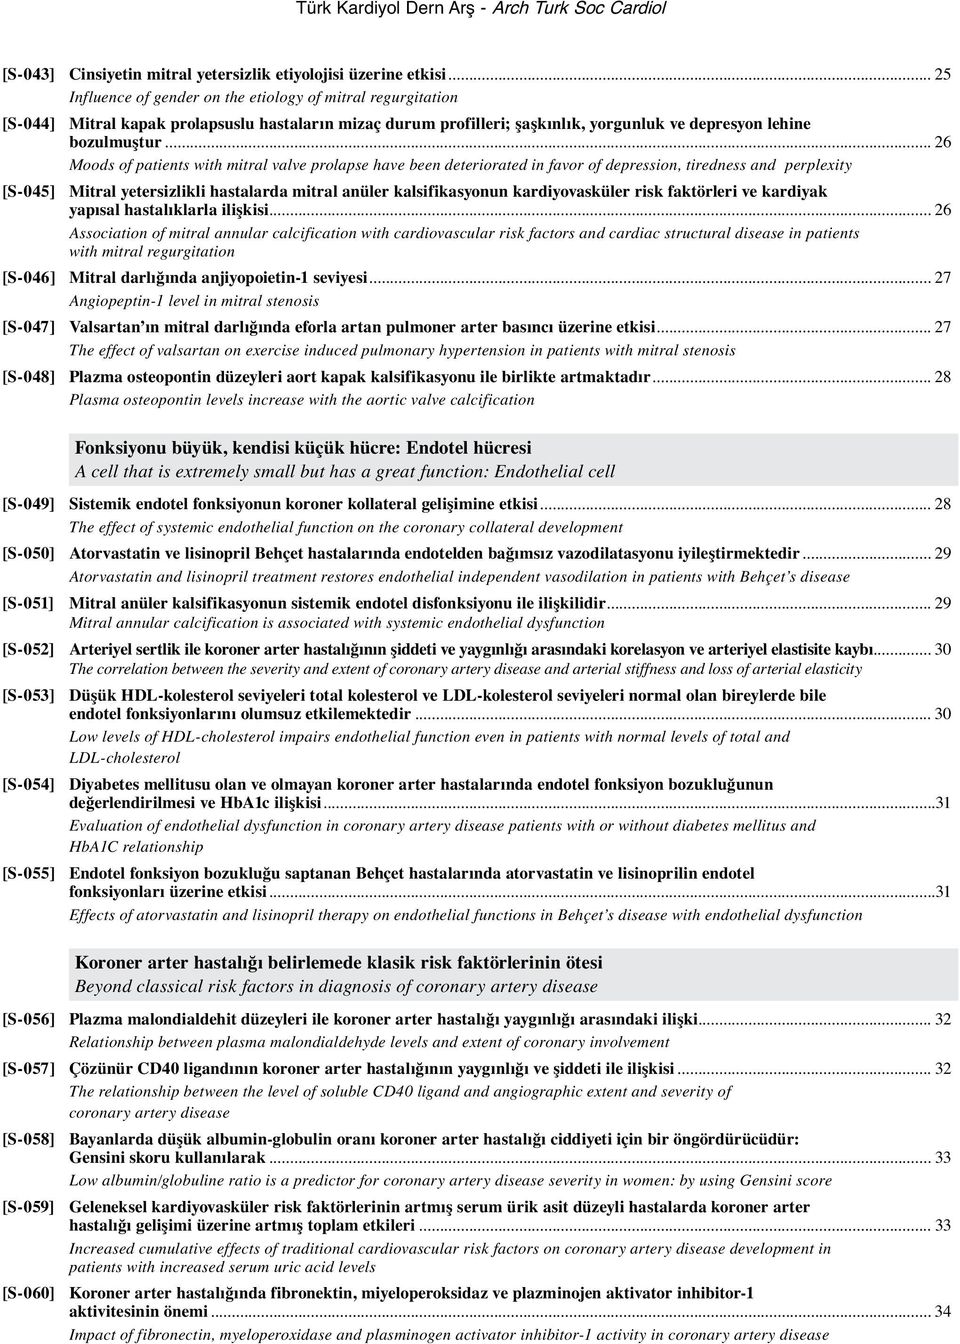 .. 26 Moods of patients with mitral valve prolapse have been deteriorated in favor of depression, tiredness and perplexity [S-045] Mitral yetersizlikli hastalarda mitral anüler kalsifikasyonun